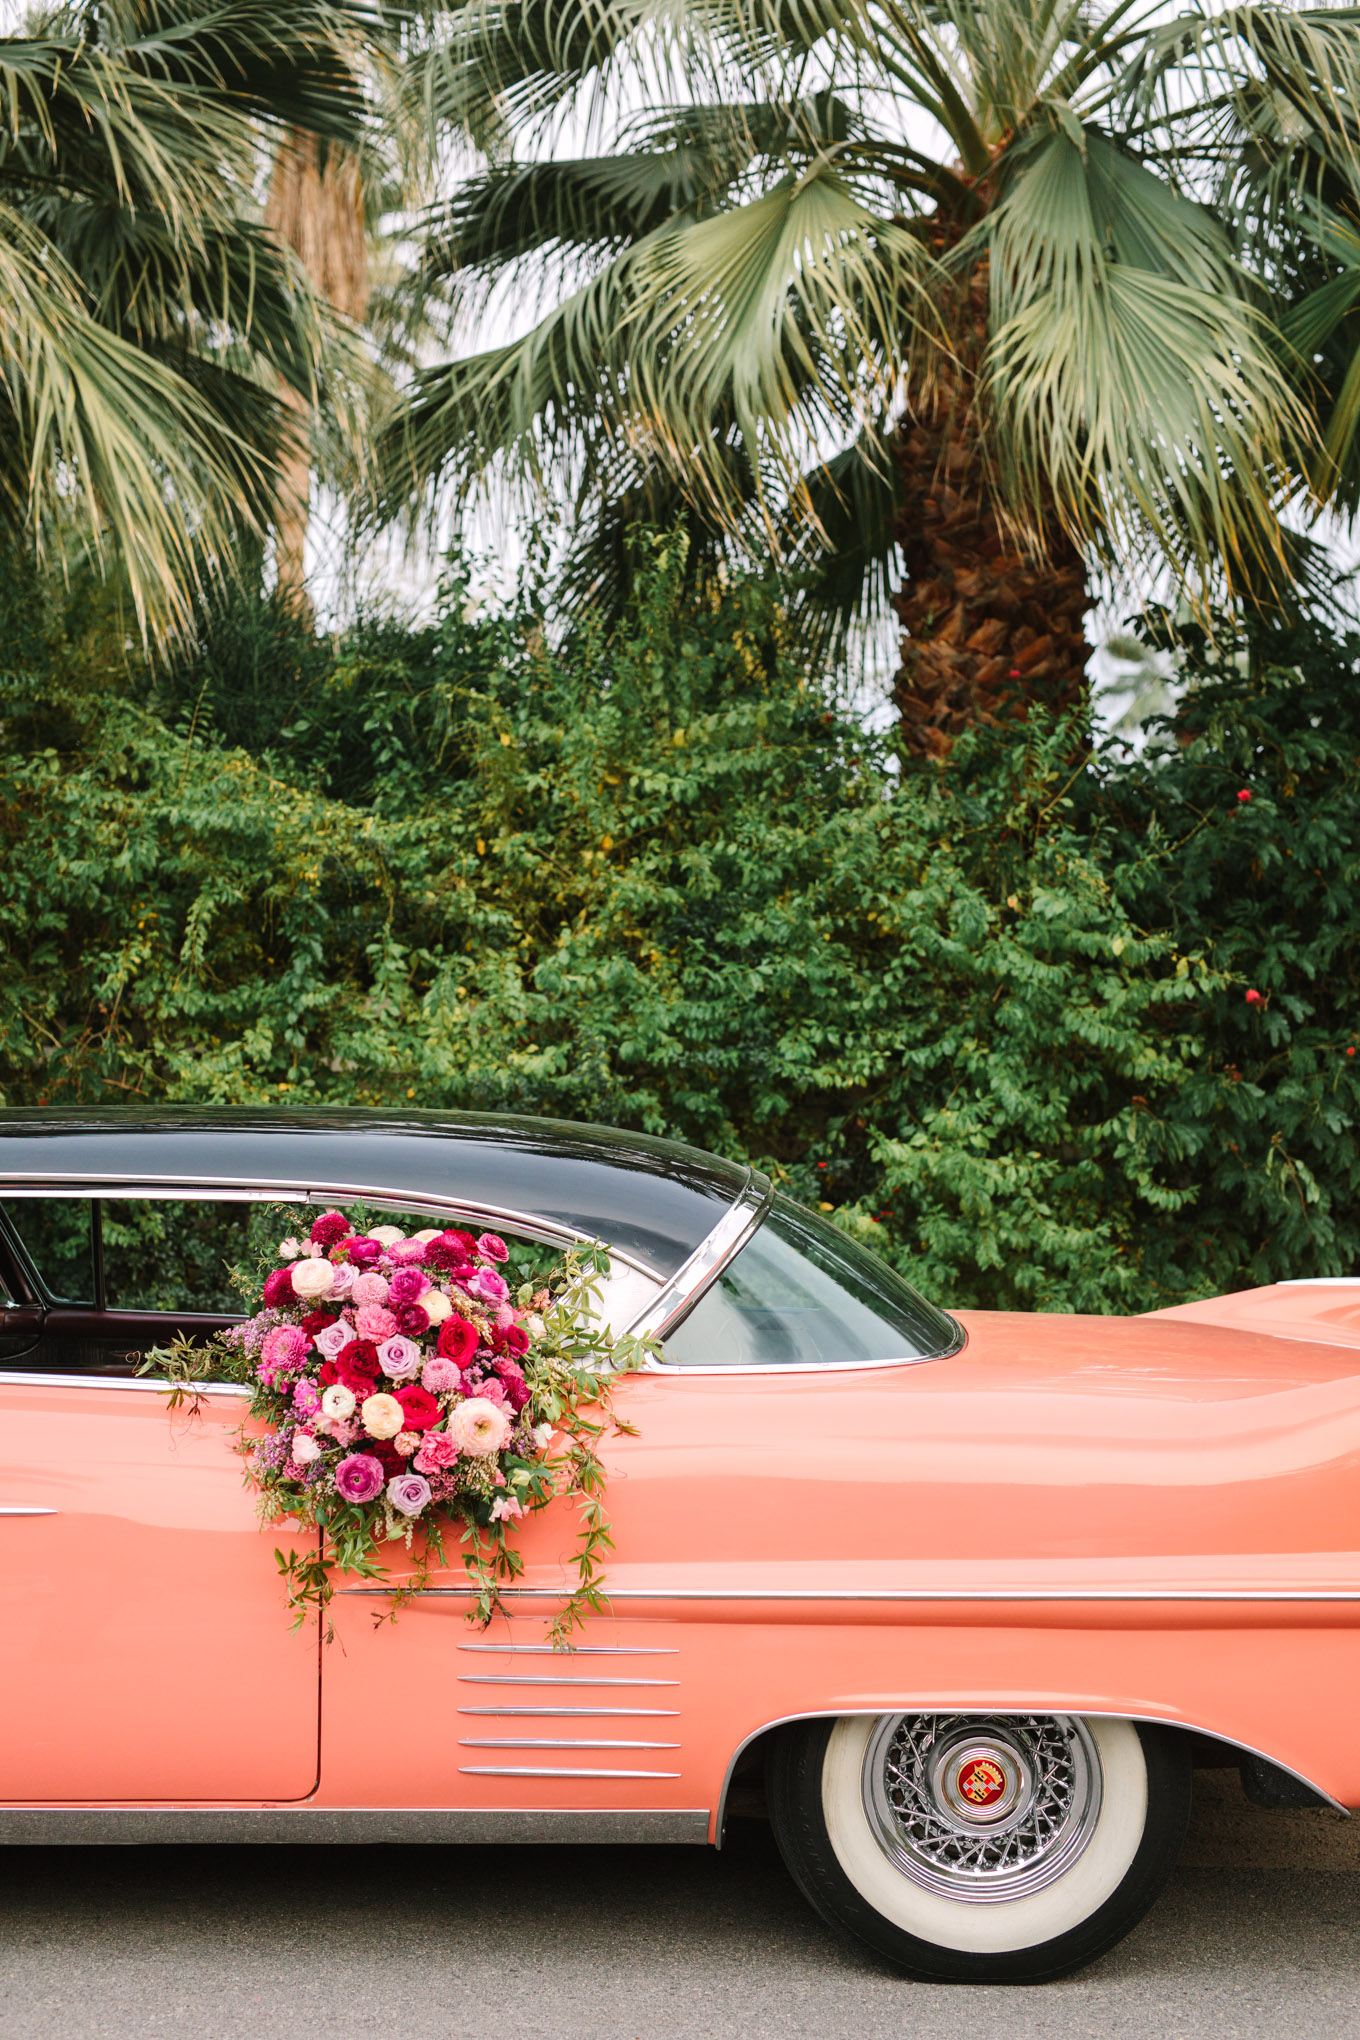 Car flower detail. Modern vintage-inspired Palm Springs engagement session with a 1960s pink Cadillac, retro clothing, and flowers by Shindig Chic. | Colorful and elevated wedding inspiration for fun-loving couples in Southern California | #engagementsession #PalmSpringsengagement #vintageweddingdress #floralcar #pinkcar   Source: Mary Costa Photography | Los Angeles